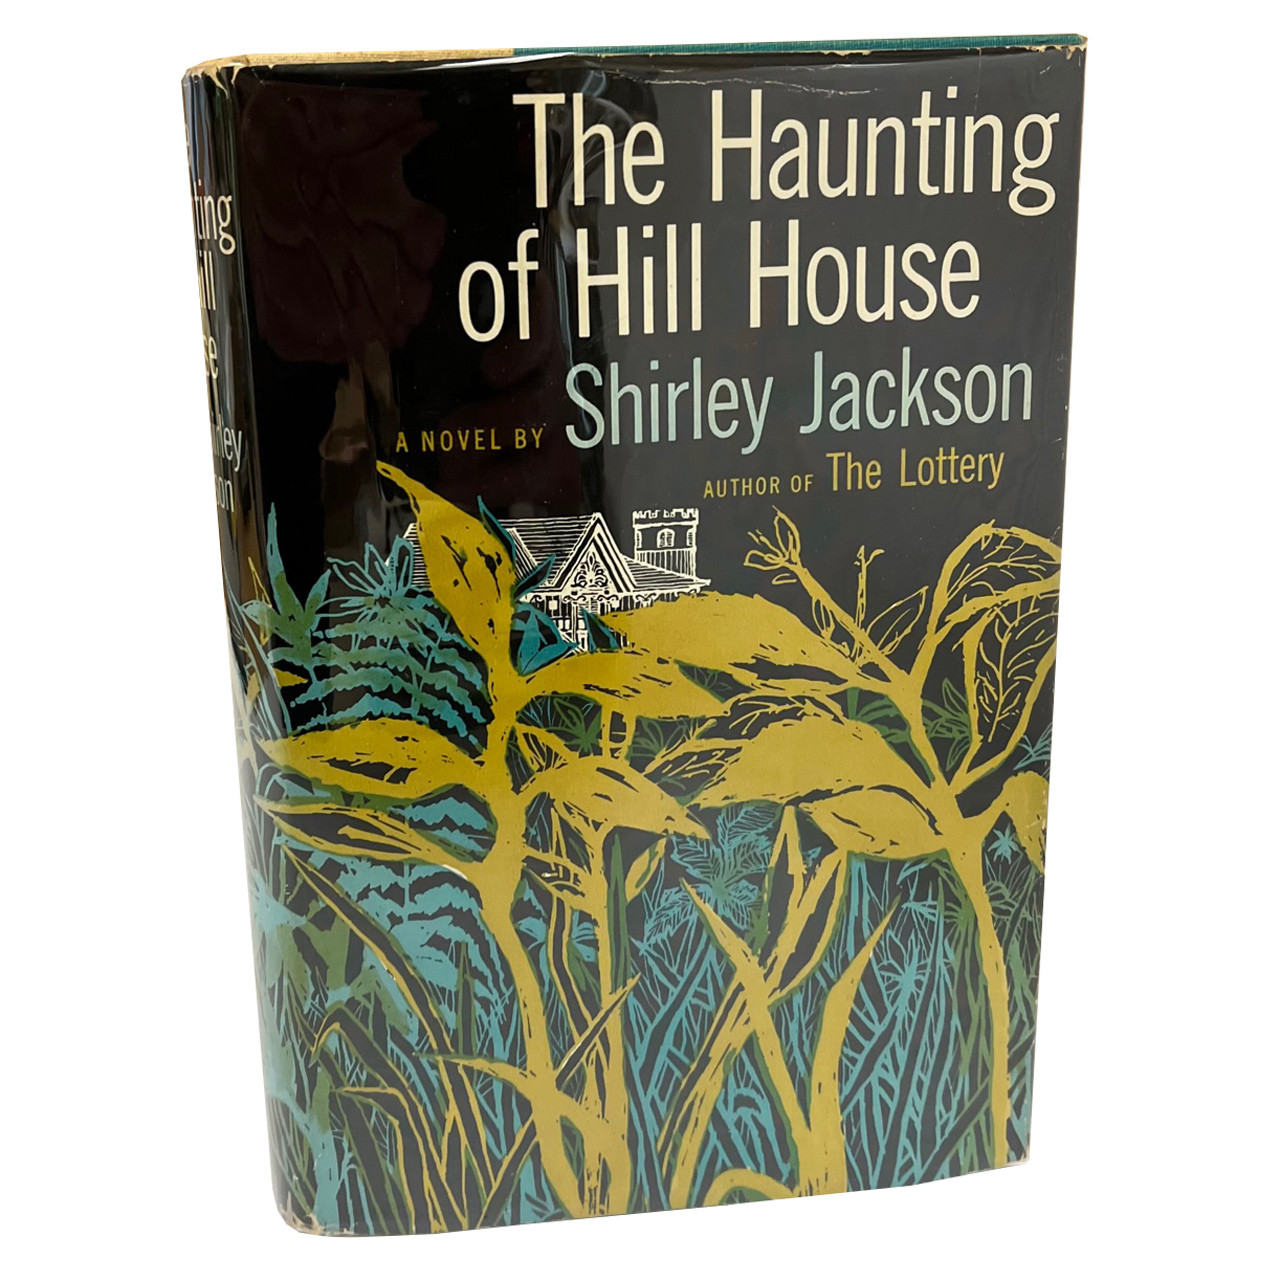 Shirley Jackson "The Haunting of Hill House" Signed First Edition, Second Printing w/COA